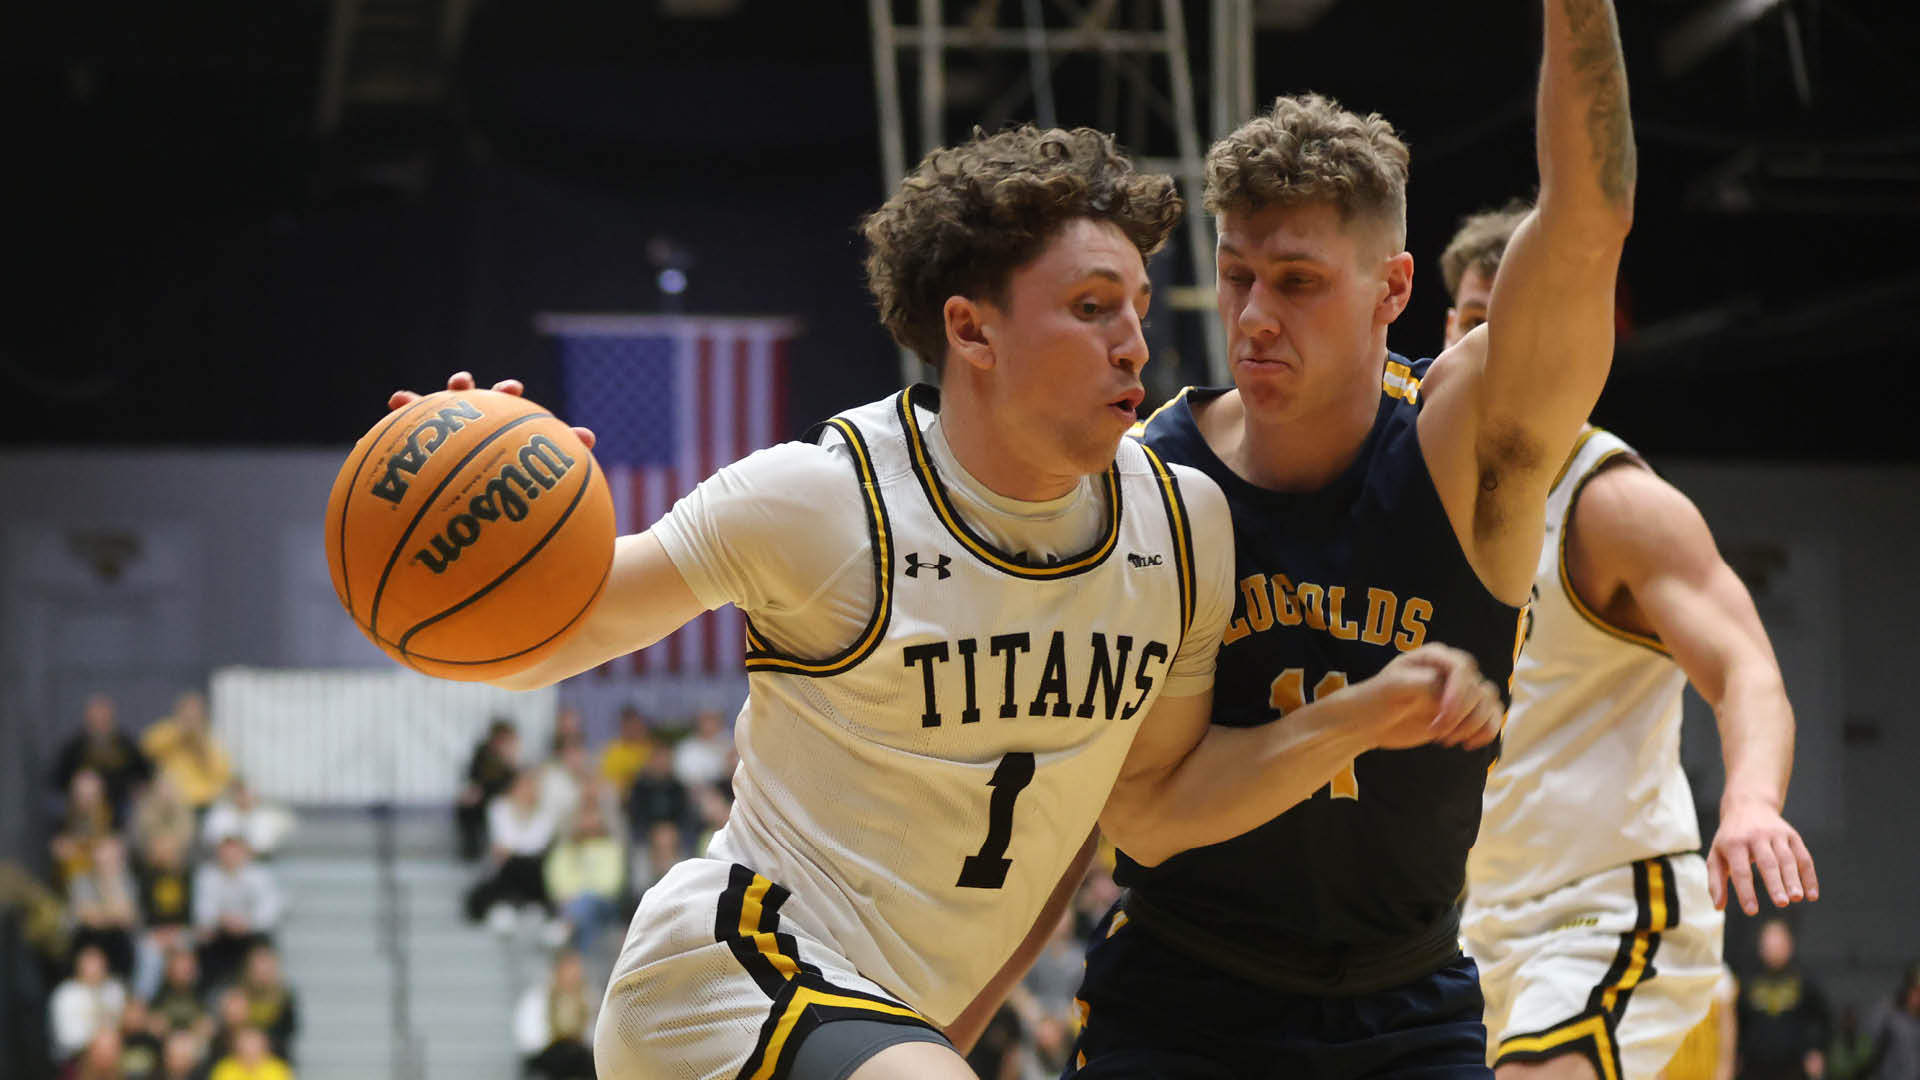 Titans Advance to Third WIAC Championship Game in Five Years